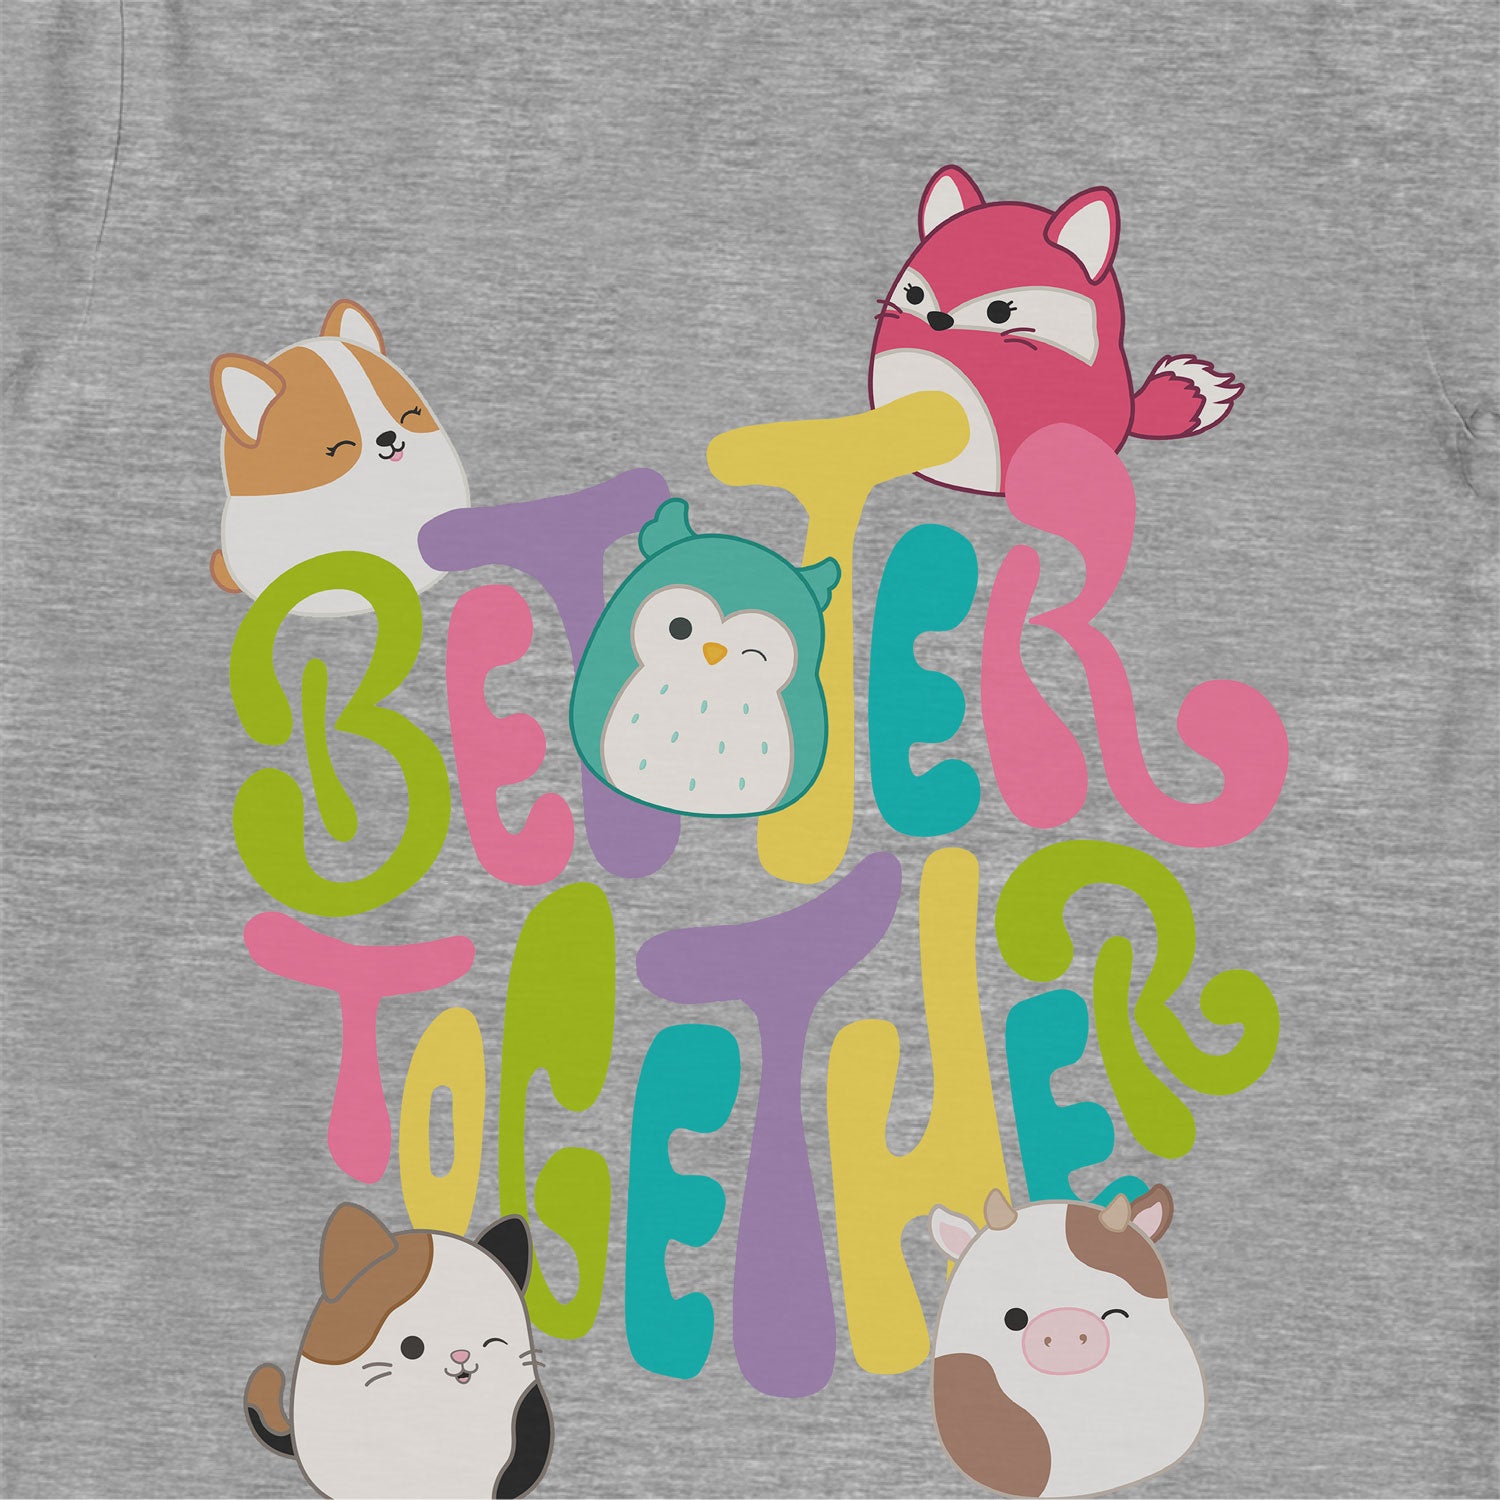 Squishmallows Better Together Grey Marl Kids T-Shirt